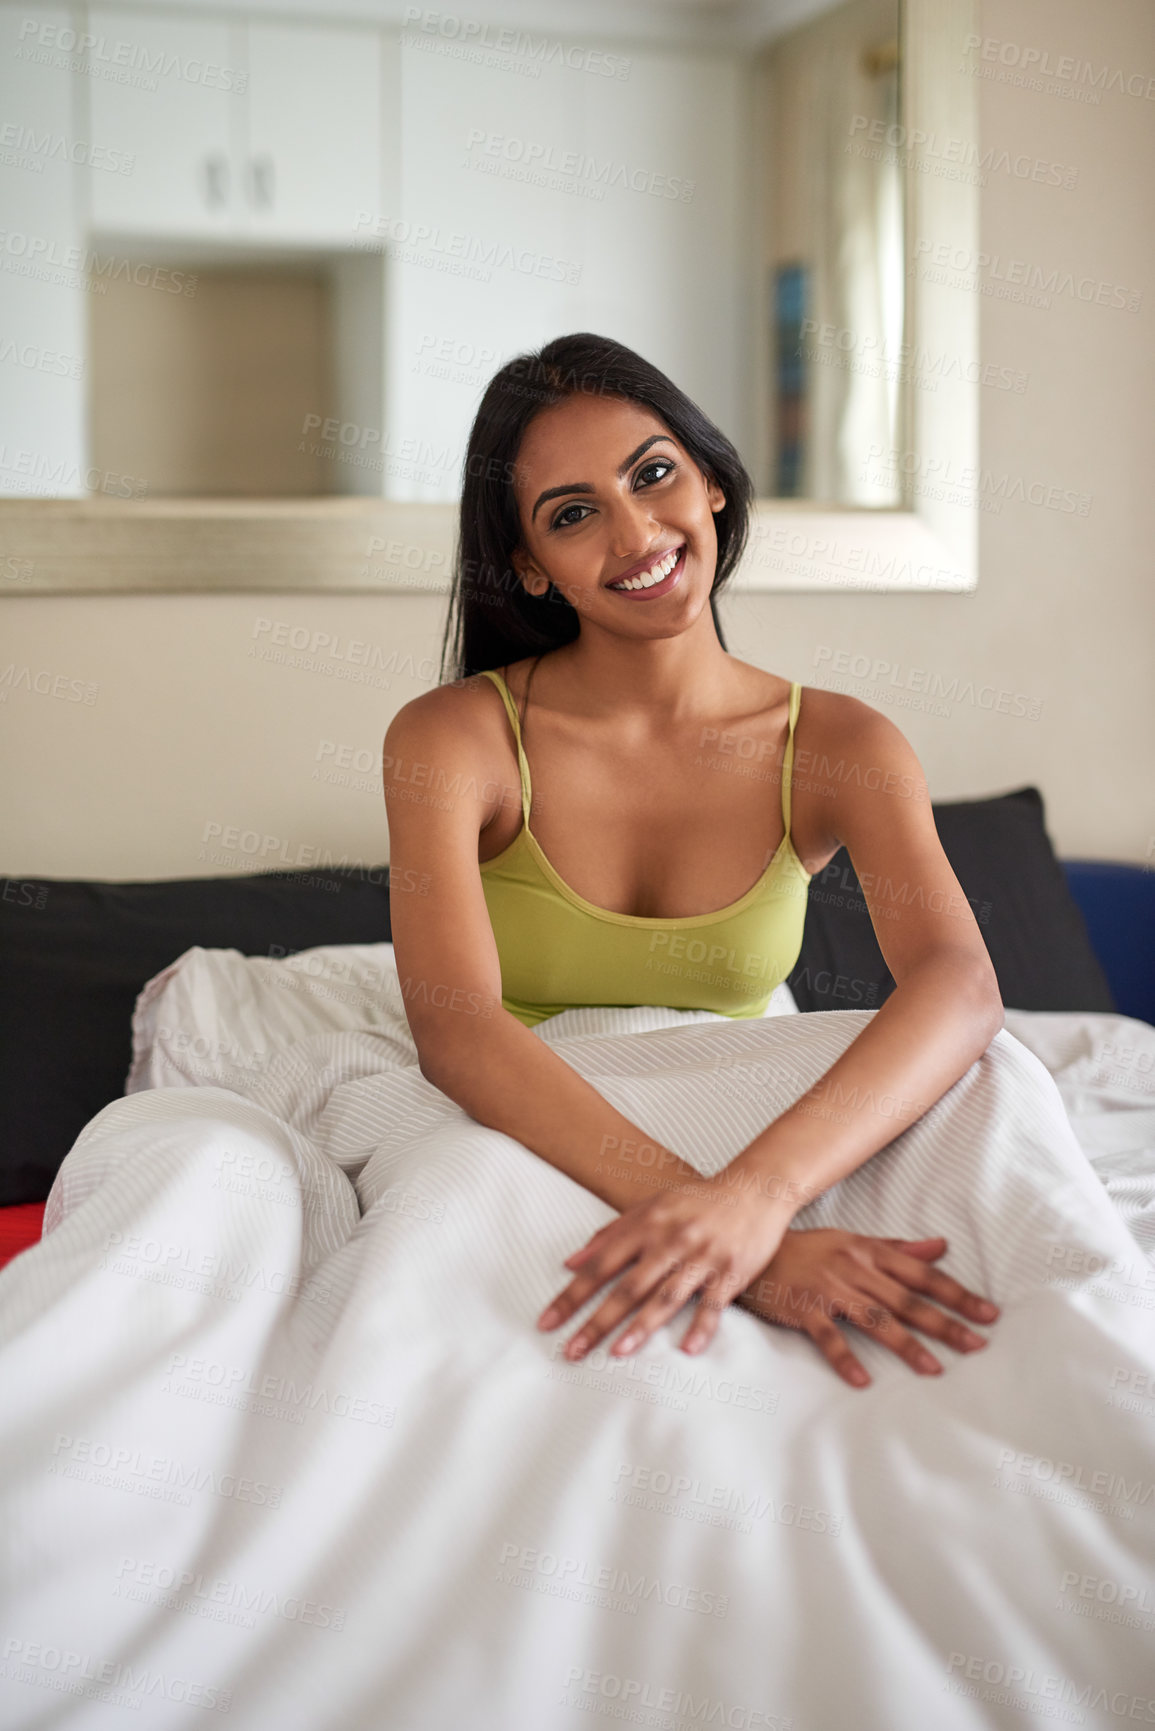 Buy stock photo Shot of a young woman waking up in bed feeling well rested